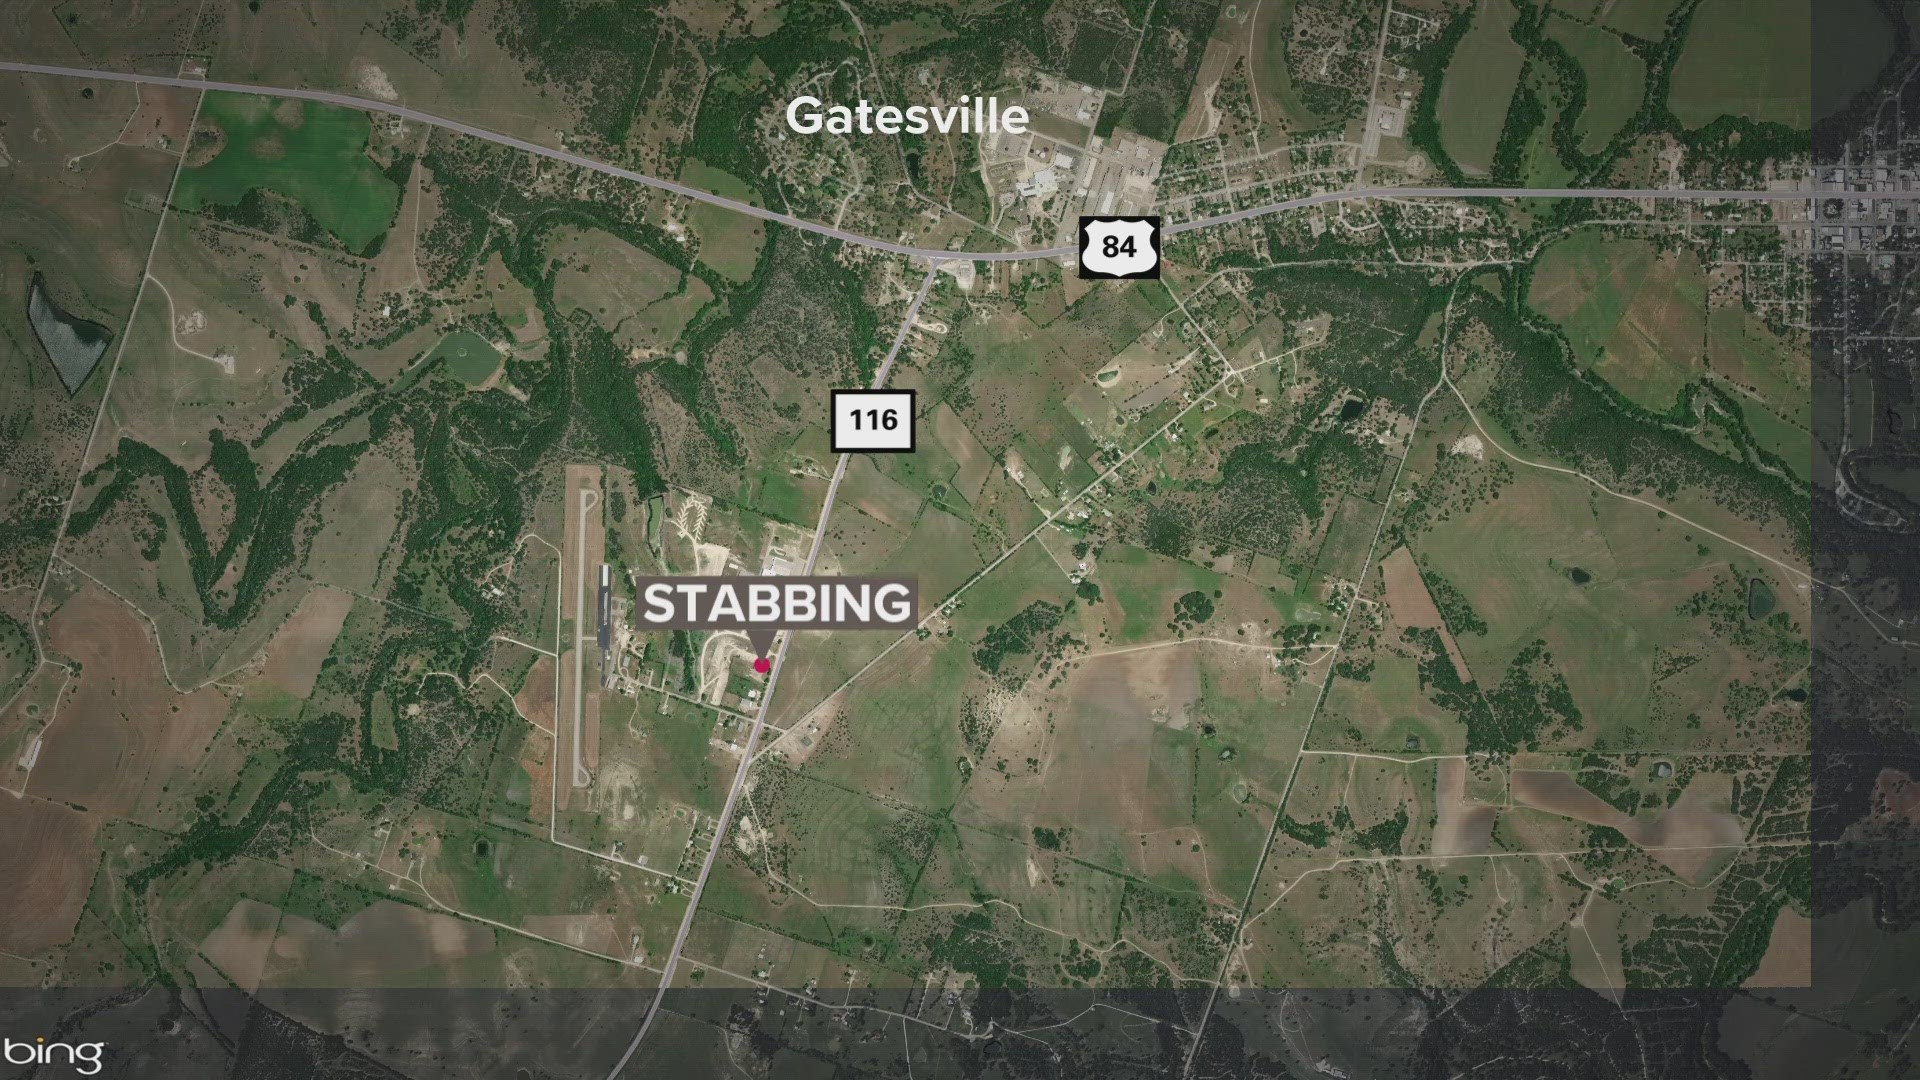 The individual who intervened has been identified as Kenneth Wayne Zahirniak, a 31-year-old Gatesville resident.